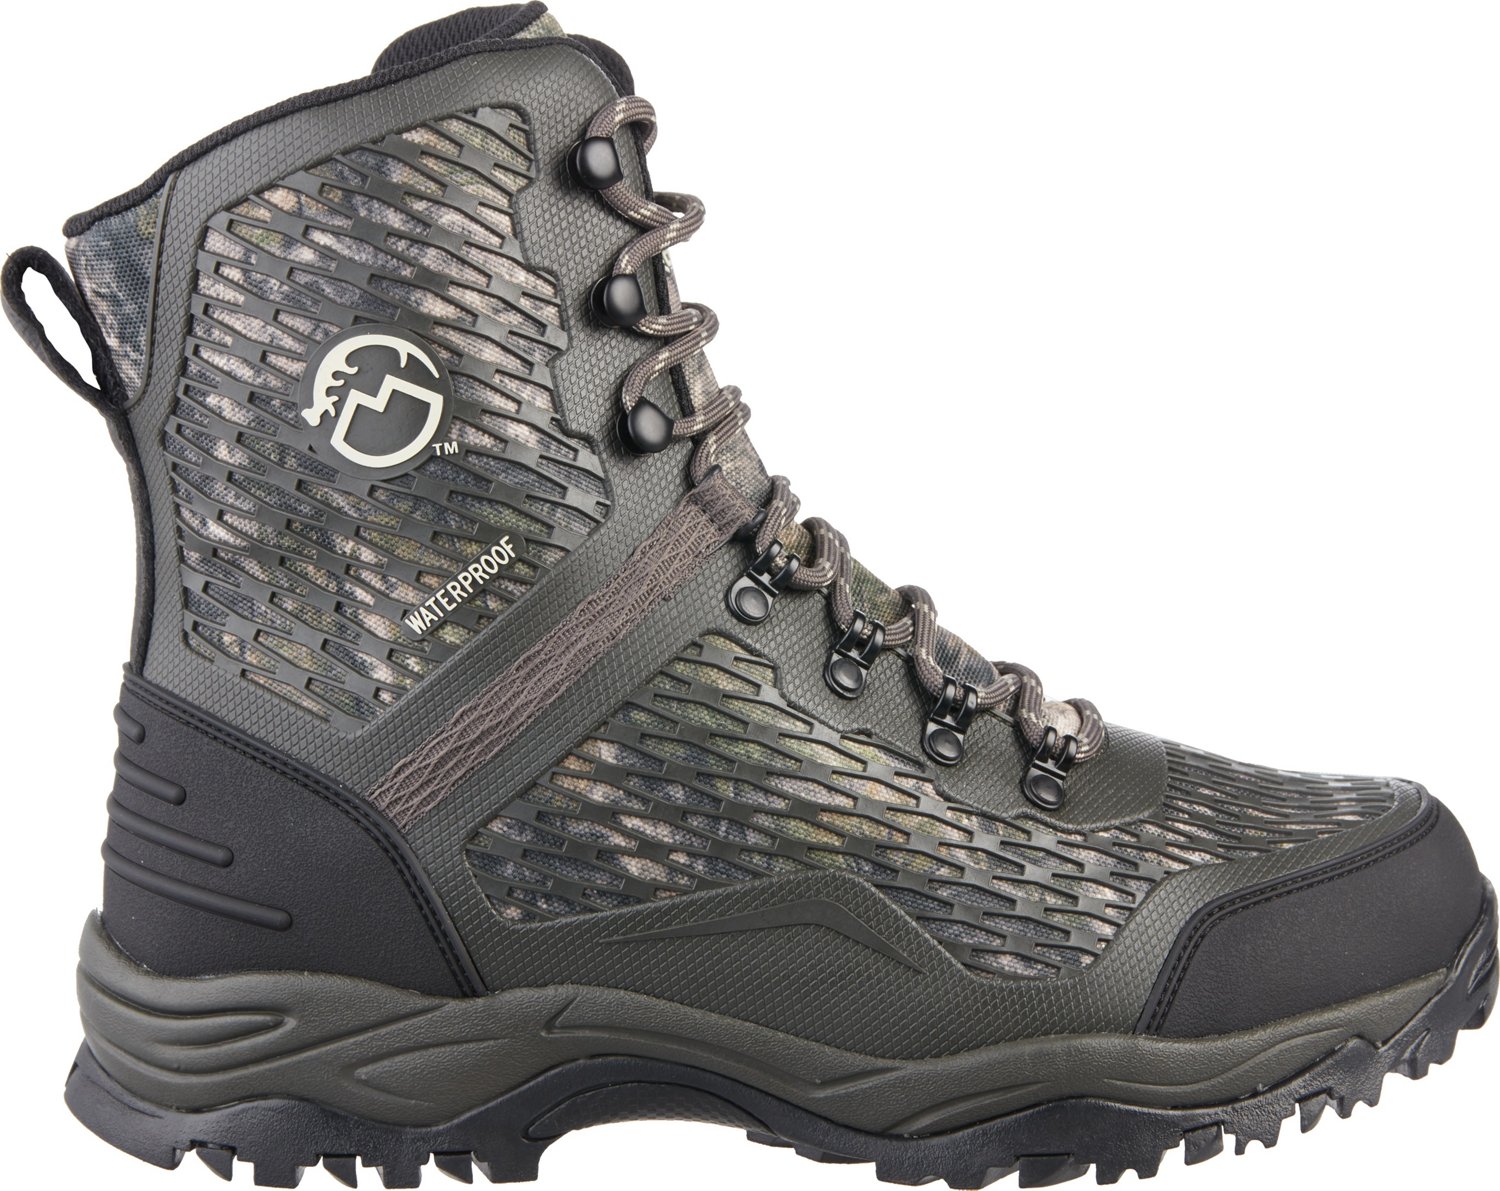 Academy Sports + Outdoors Magellan Outdoors Men's Basic Hunting